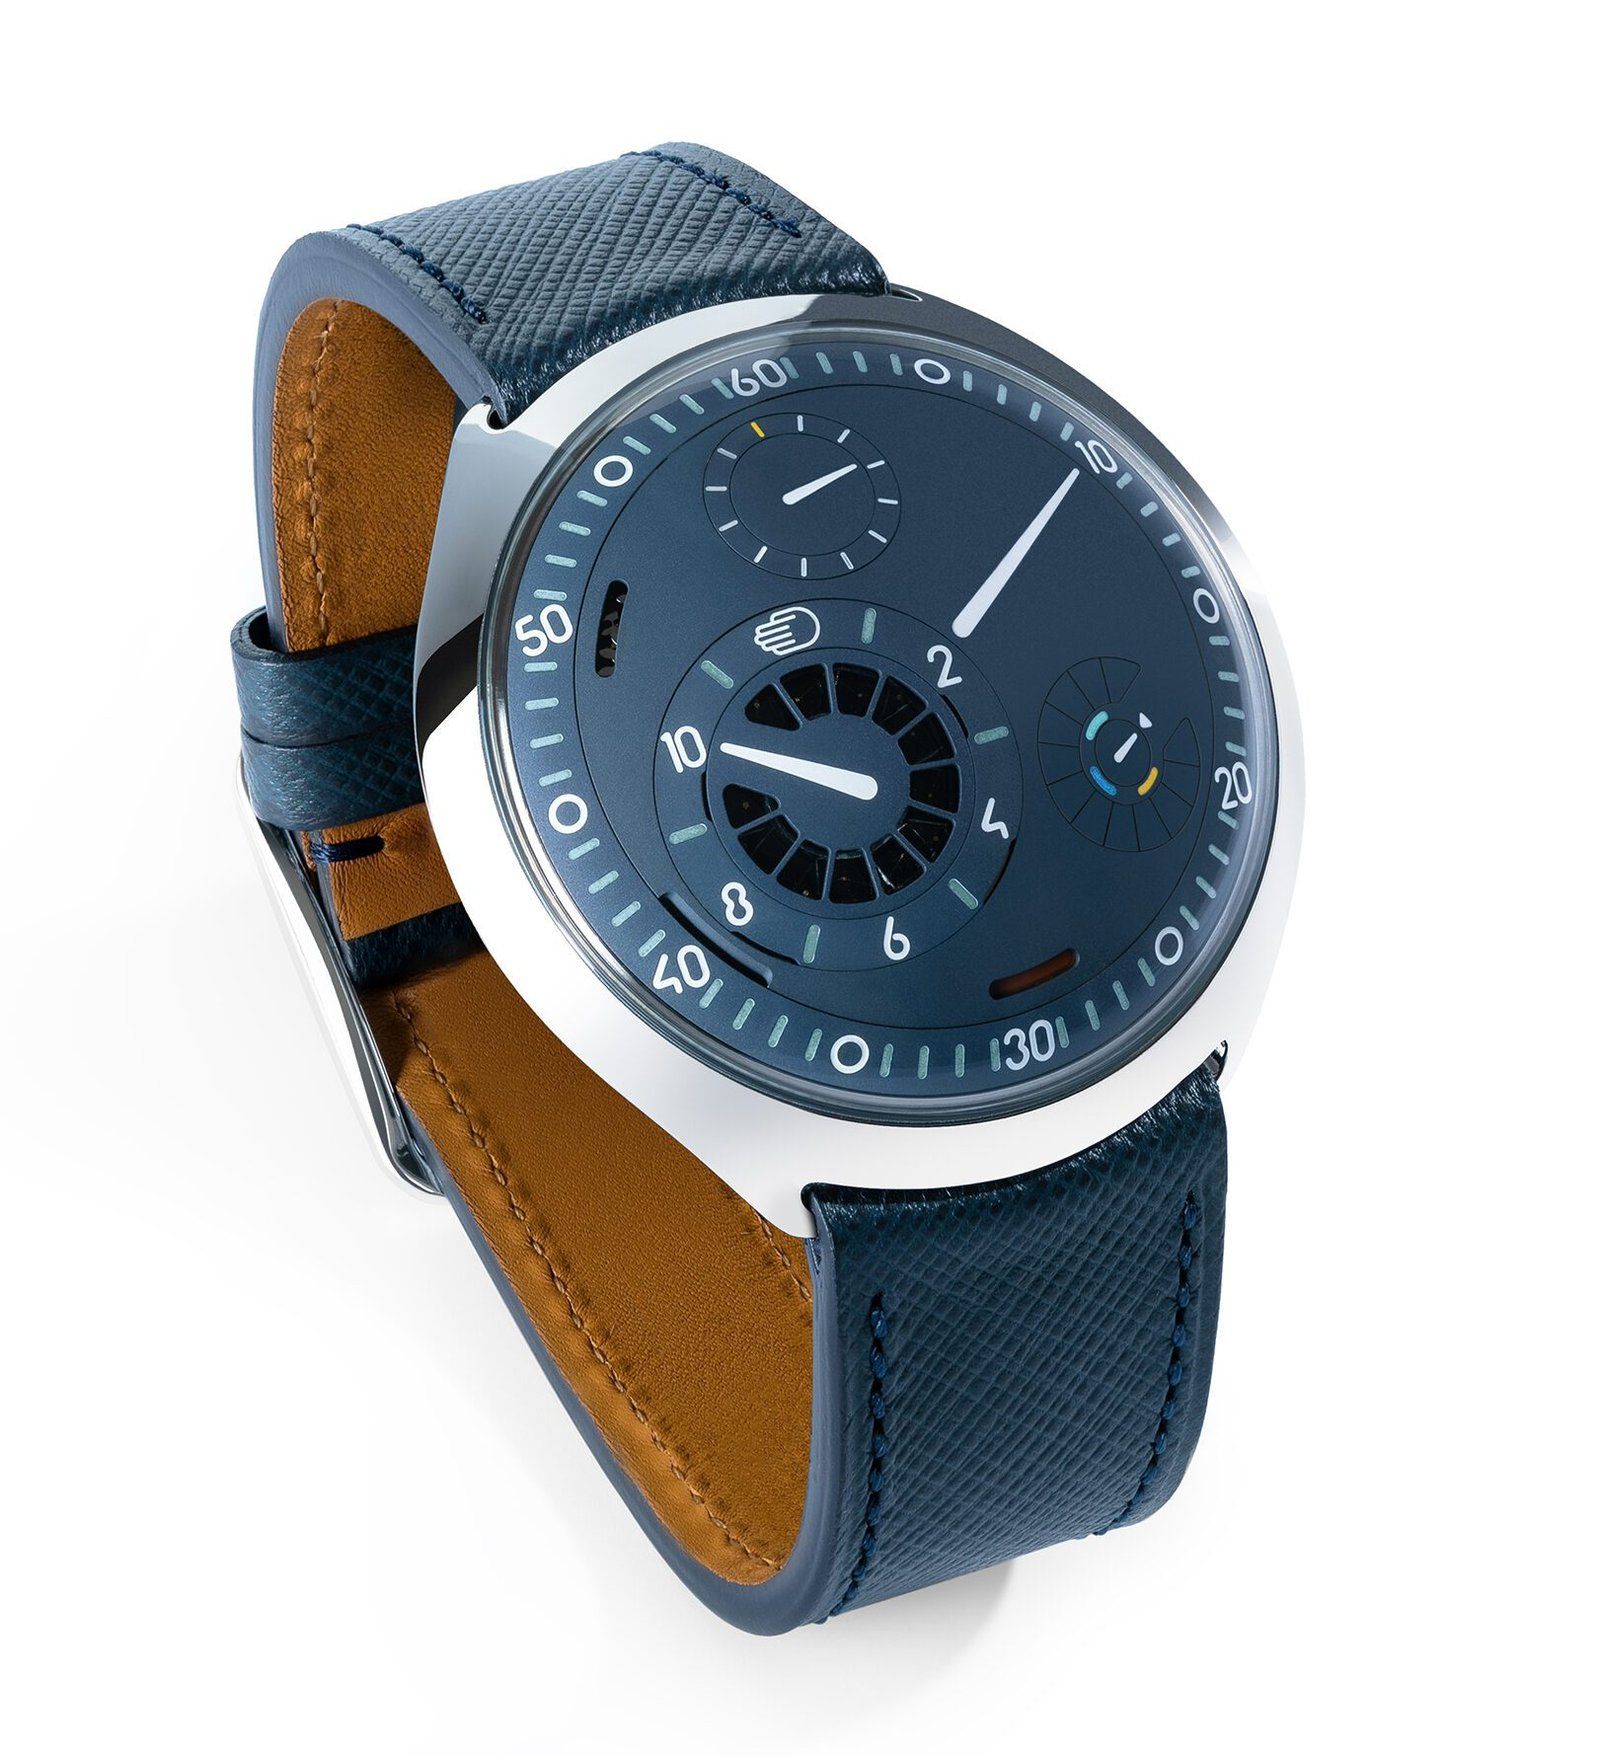 FEATURED: Ressence Type 2N